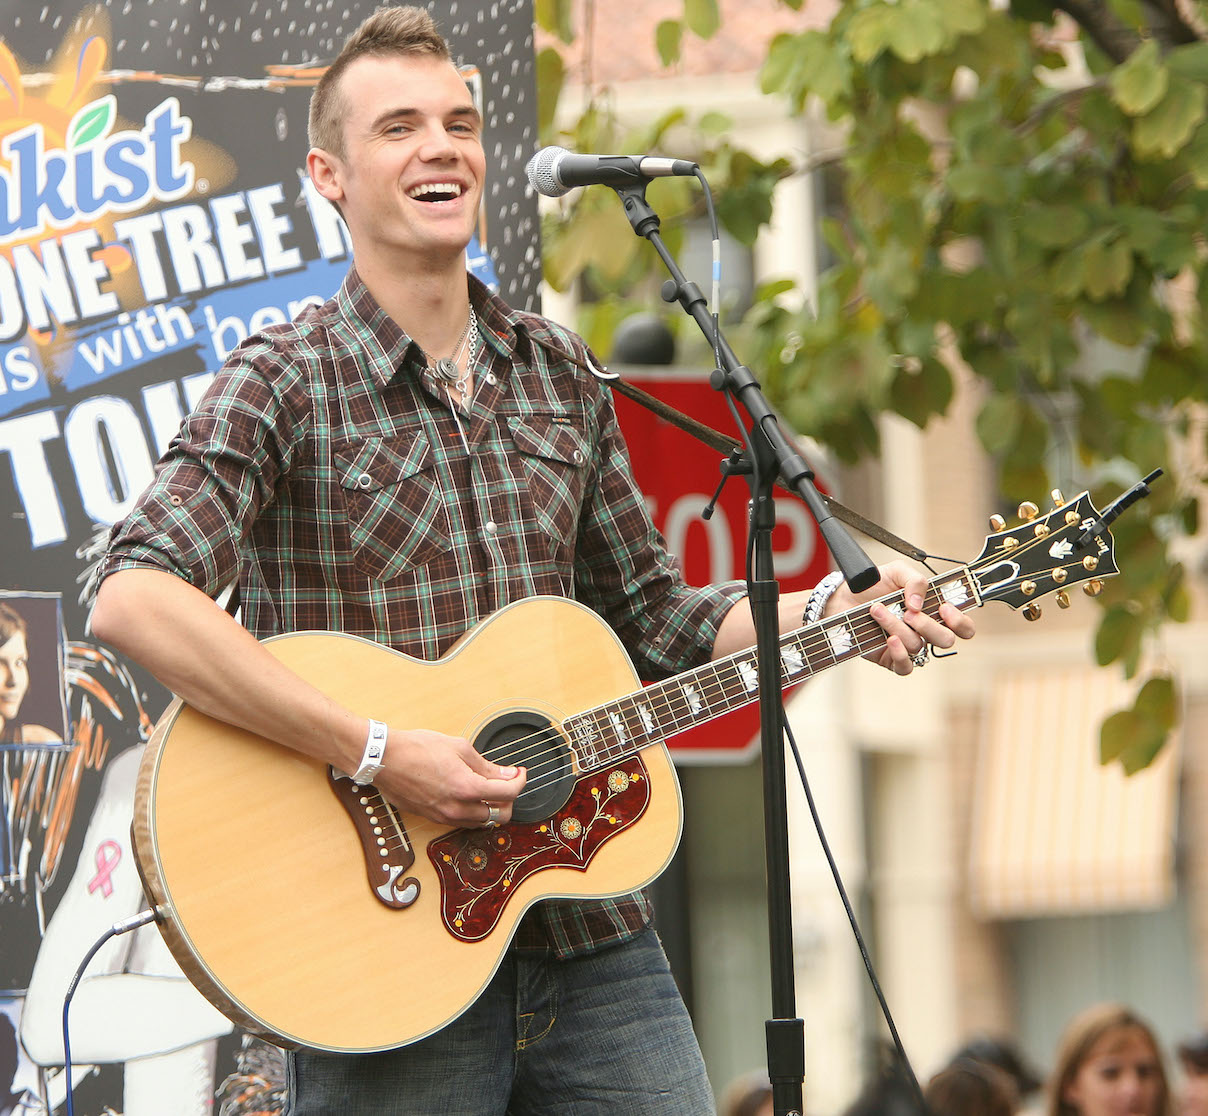 Tyler Hilton performs during the Sunkist 'One Tree Hill' Friends with Benefits Tour